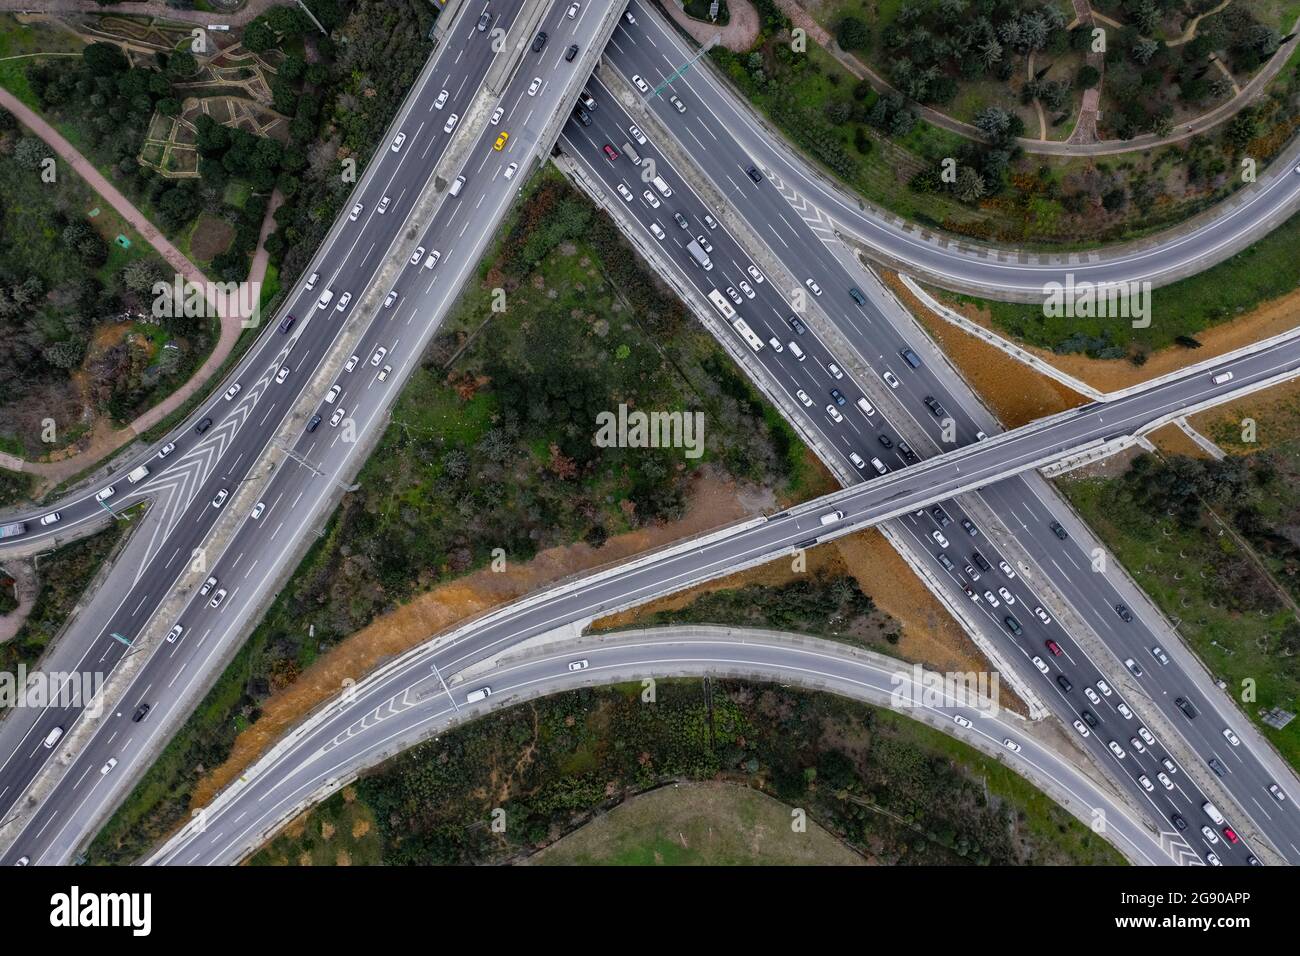 Turkey, Istanbul, Aerial view of traffic along highways and overpasses in Atasehir Stock Photo